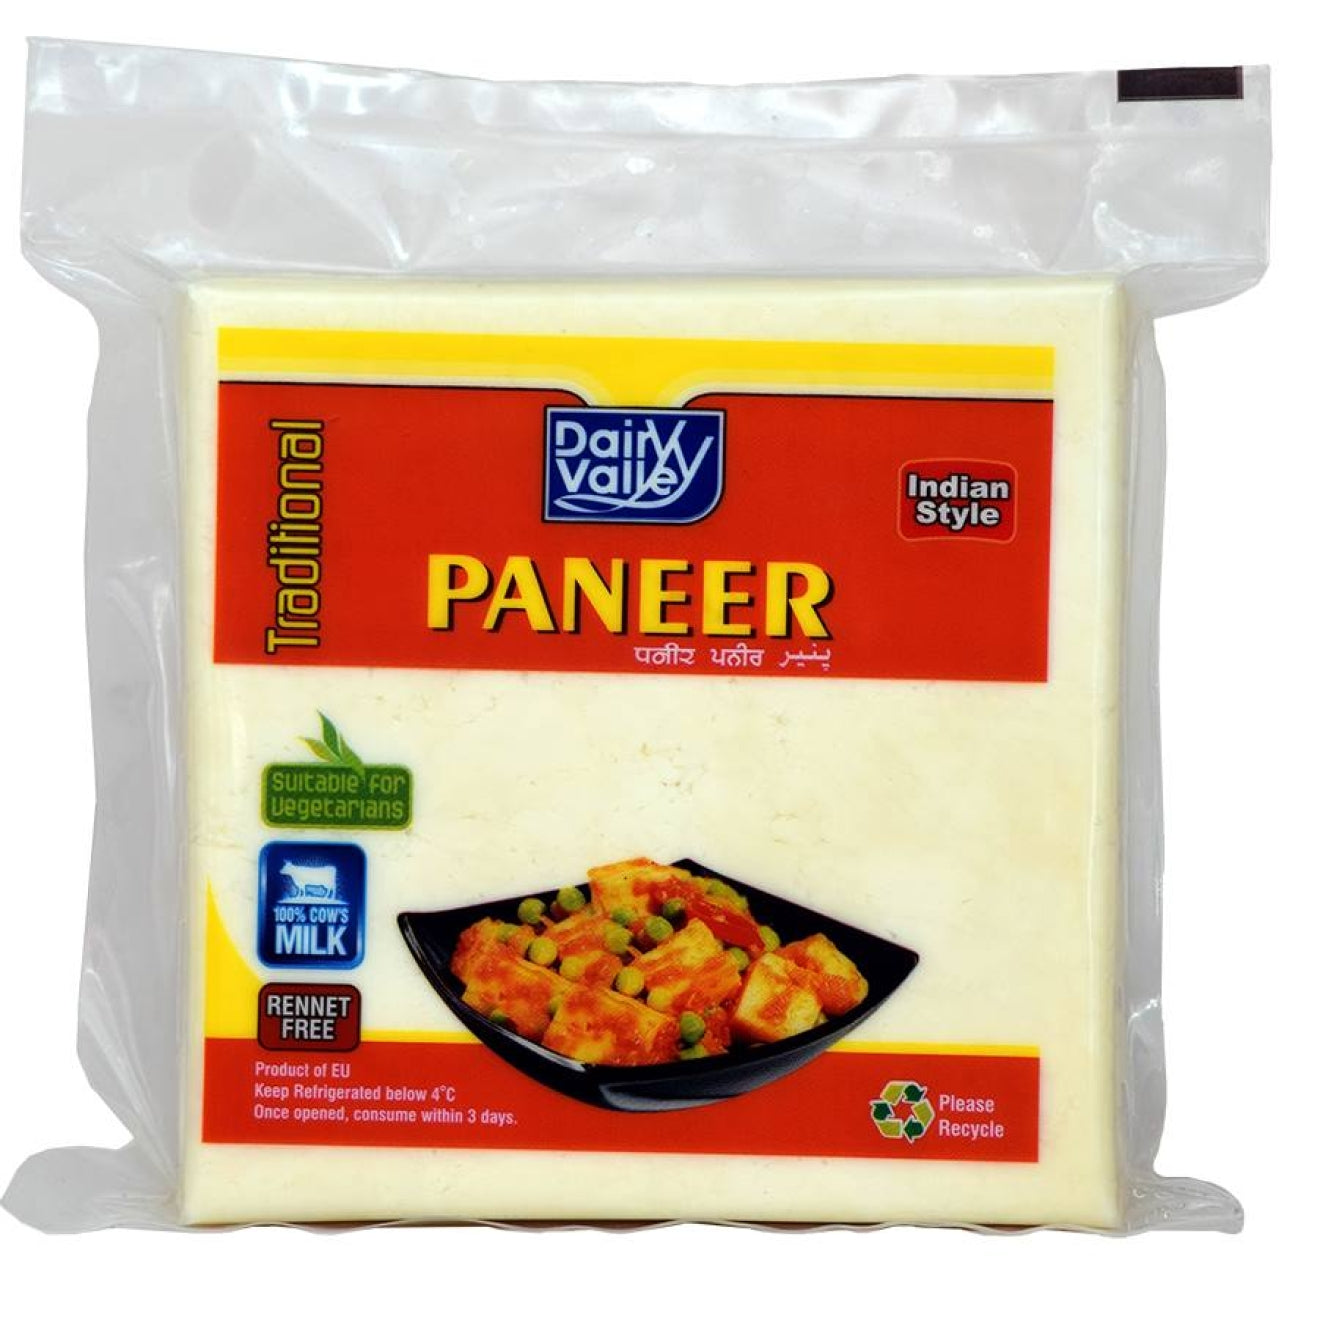 DAIRY VALLEY PANEER FRESH TRADITIONAL CHEESE FROM 100% COWS MILK 1kg